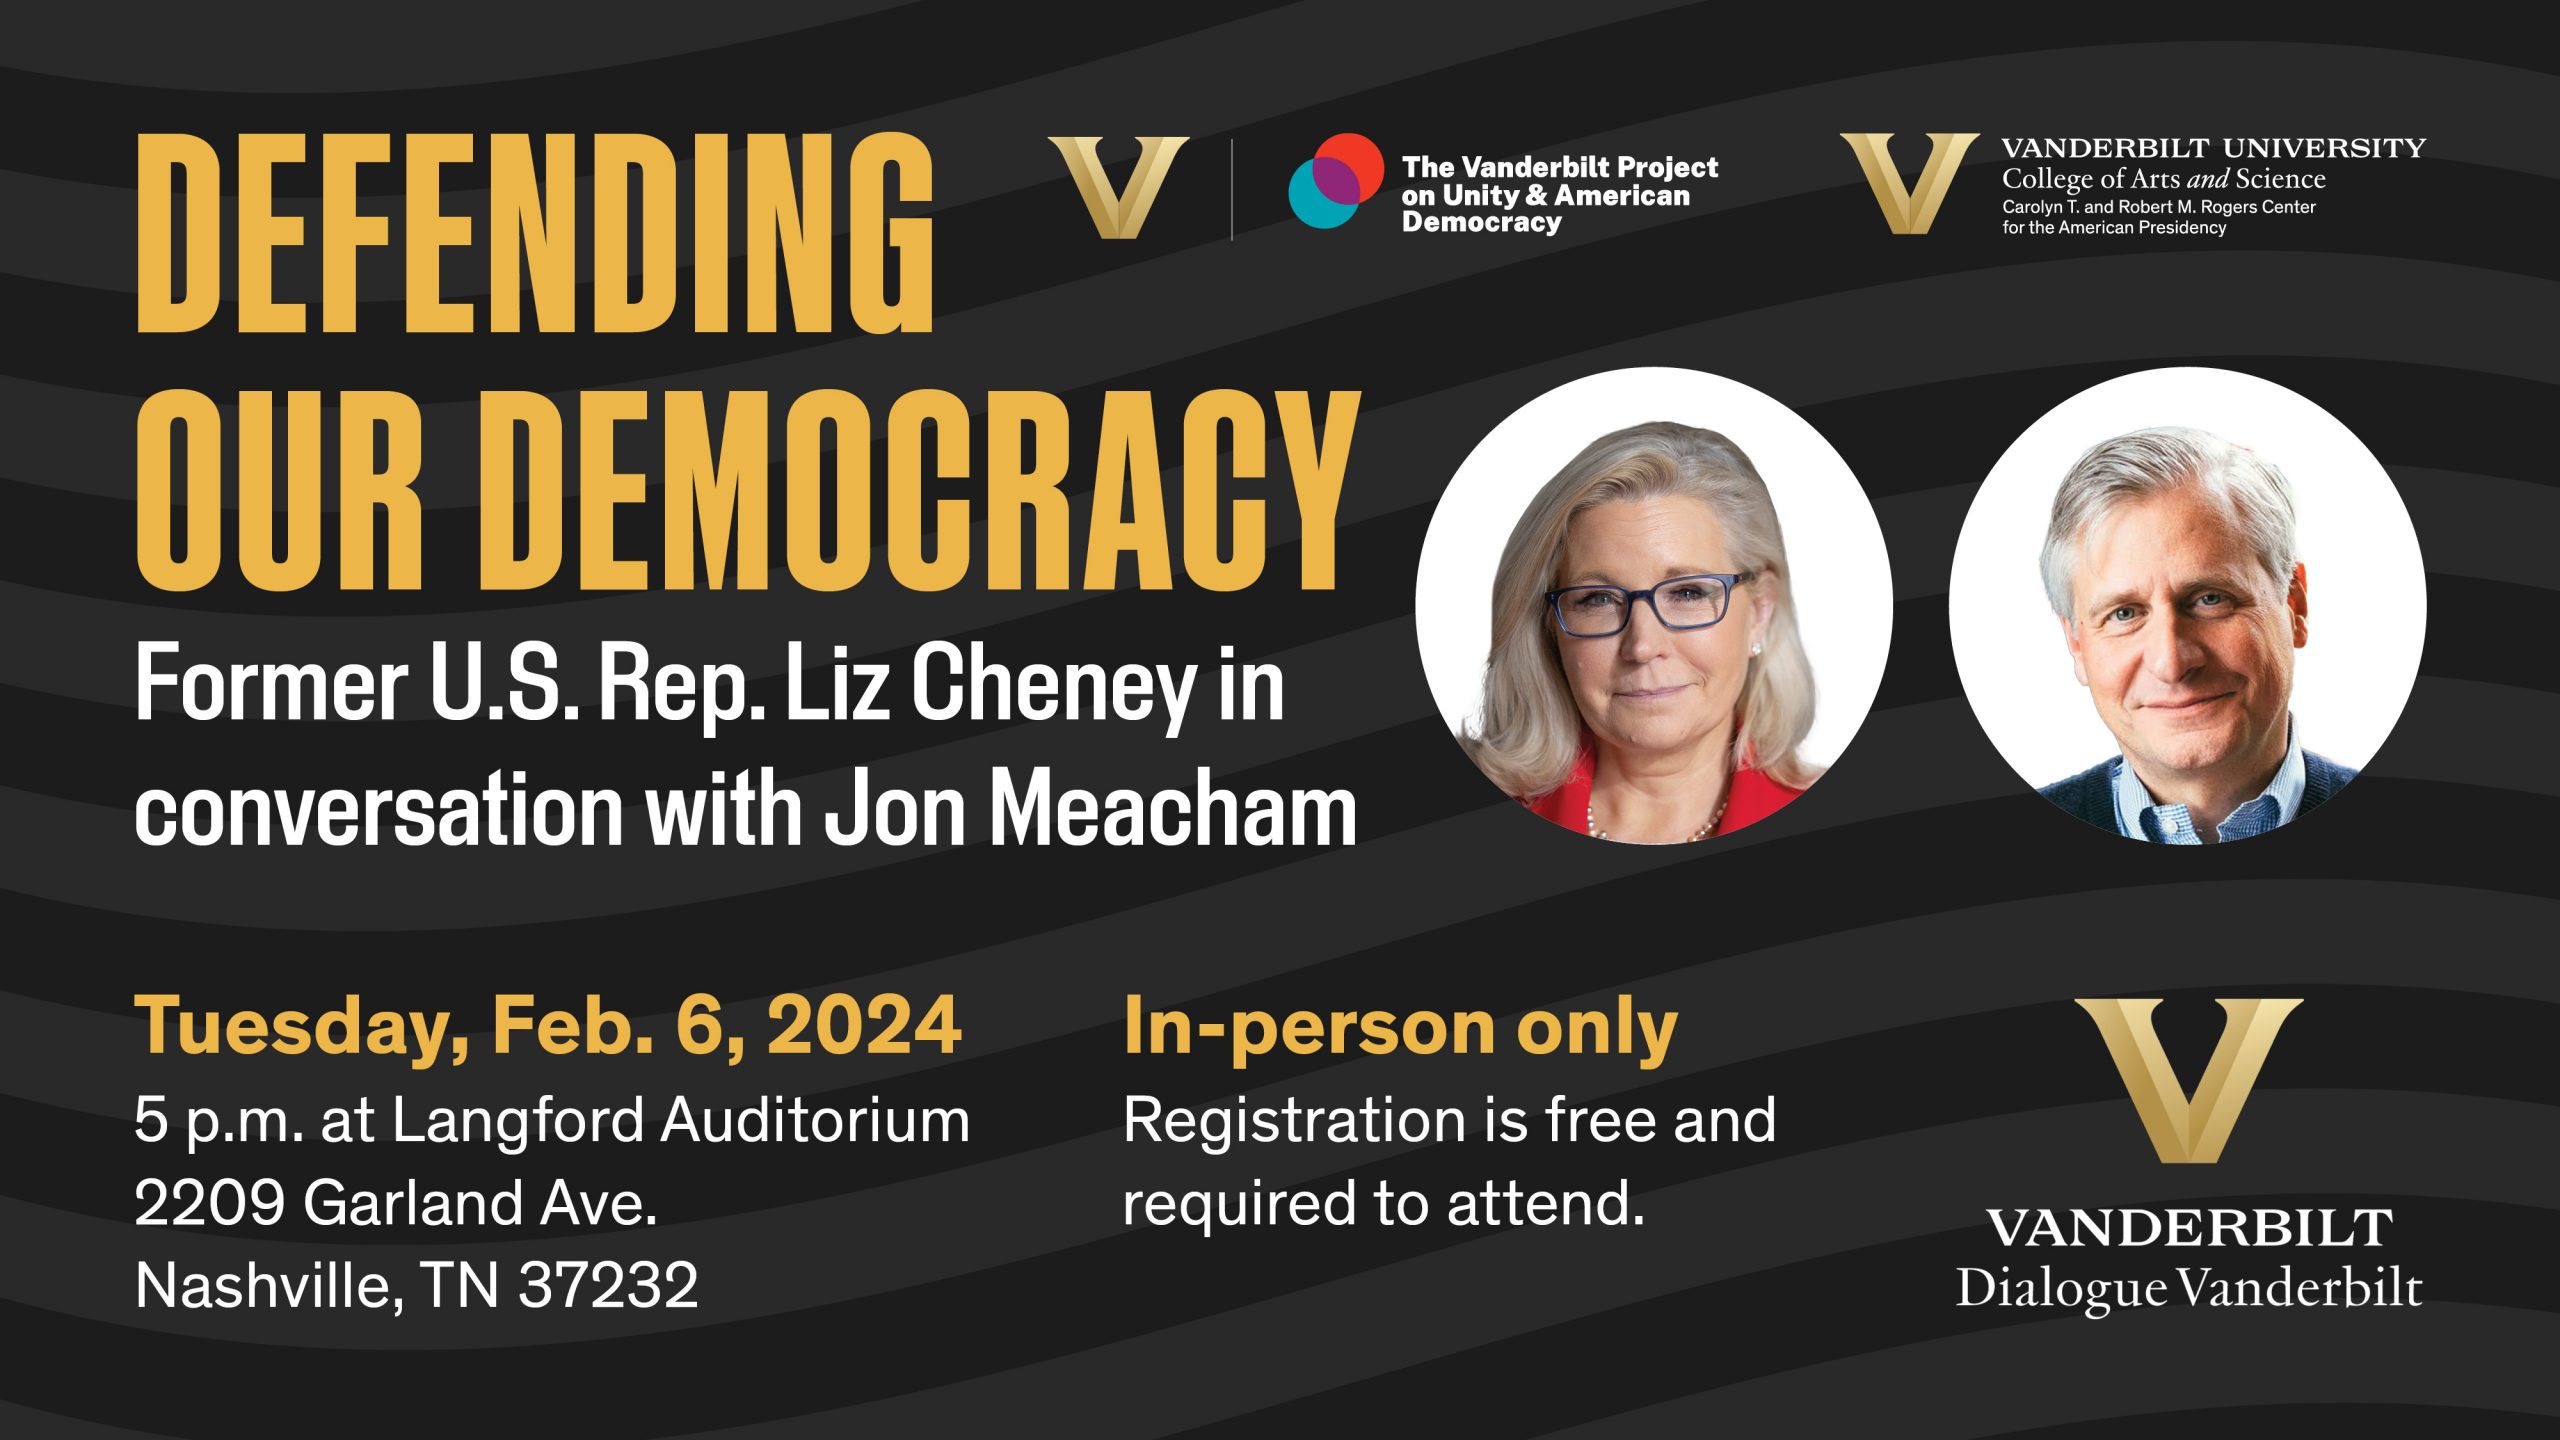 REGISTER: “Defending Our Democracy”: Exclusive conversation between Liz Cheney and Jon Meacham on democracy, the presidency and Jan. 6, 2021